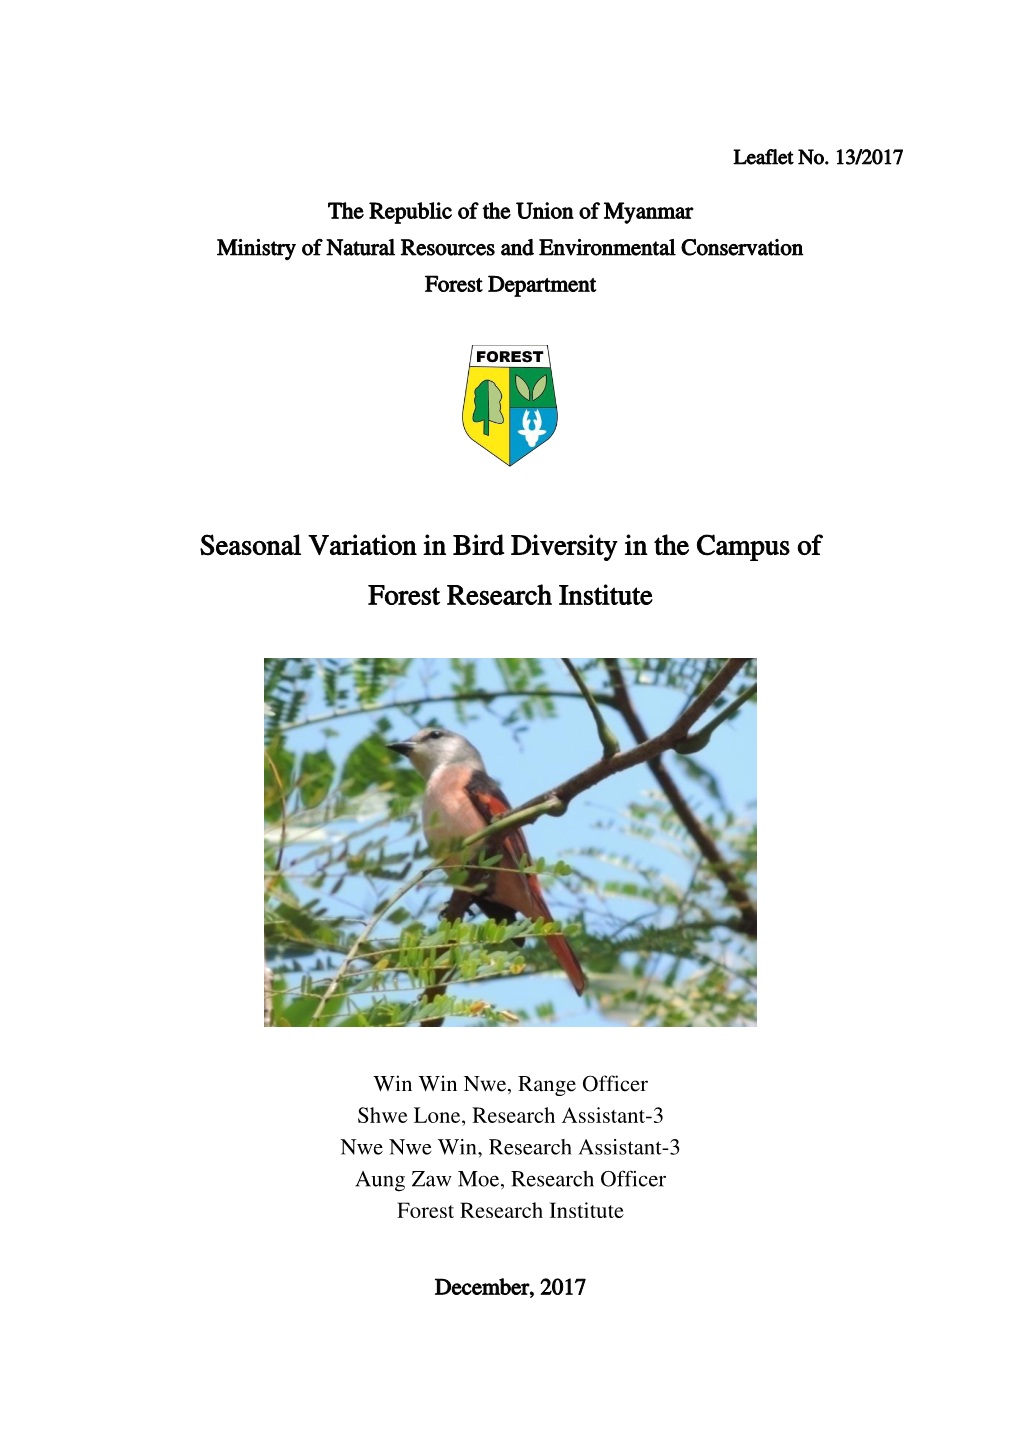 Seasonal Variation in Bird Diversity in the Campus of Forest Research Institute